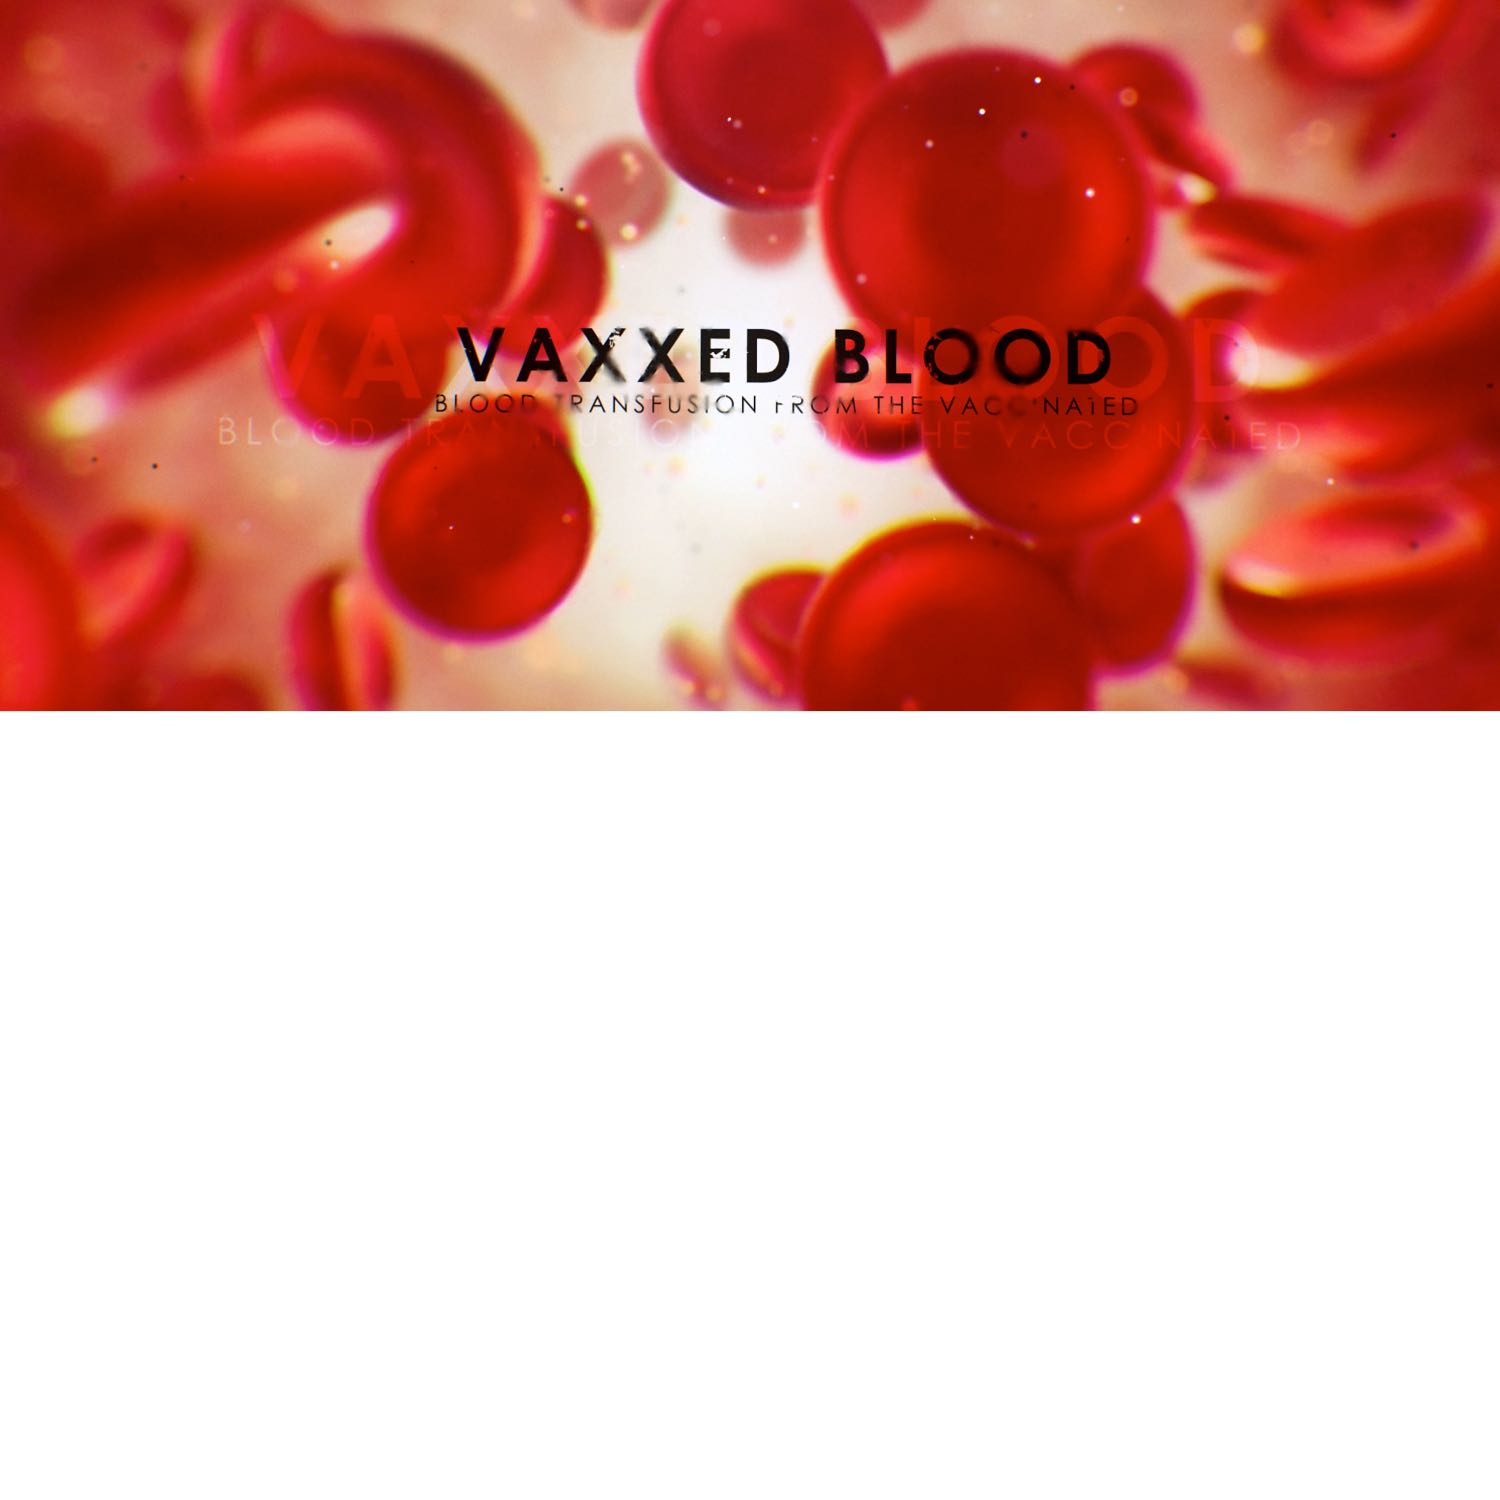 Vaxxed Blood - The Issue of Transfusions